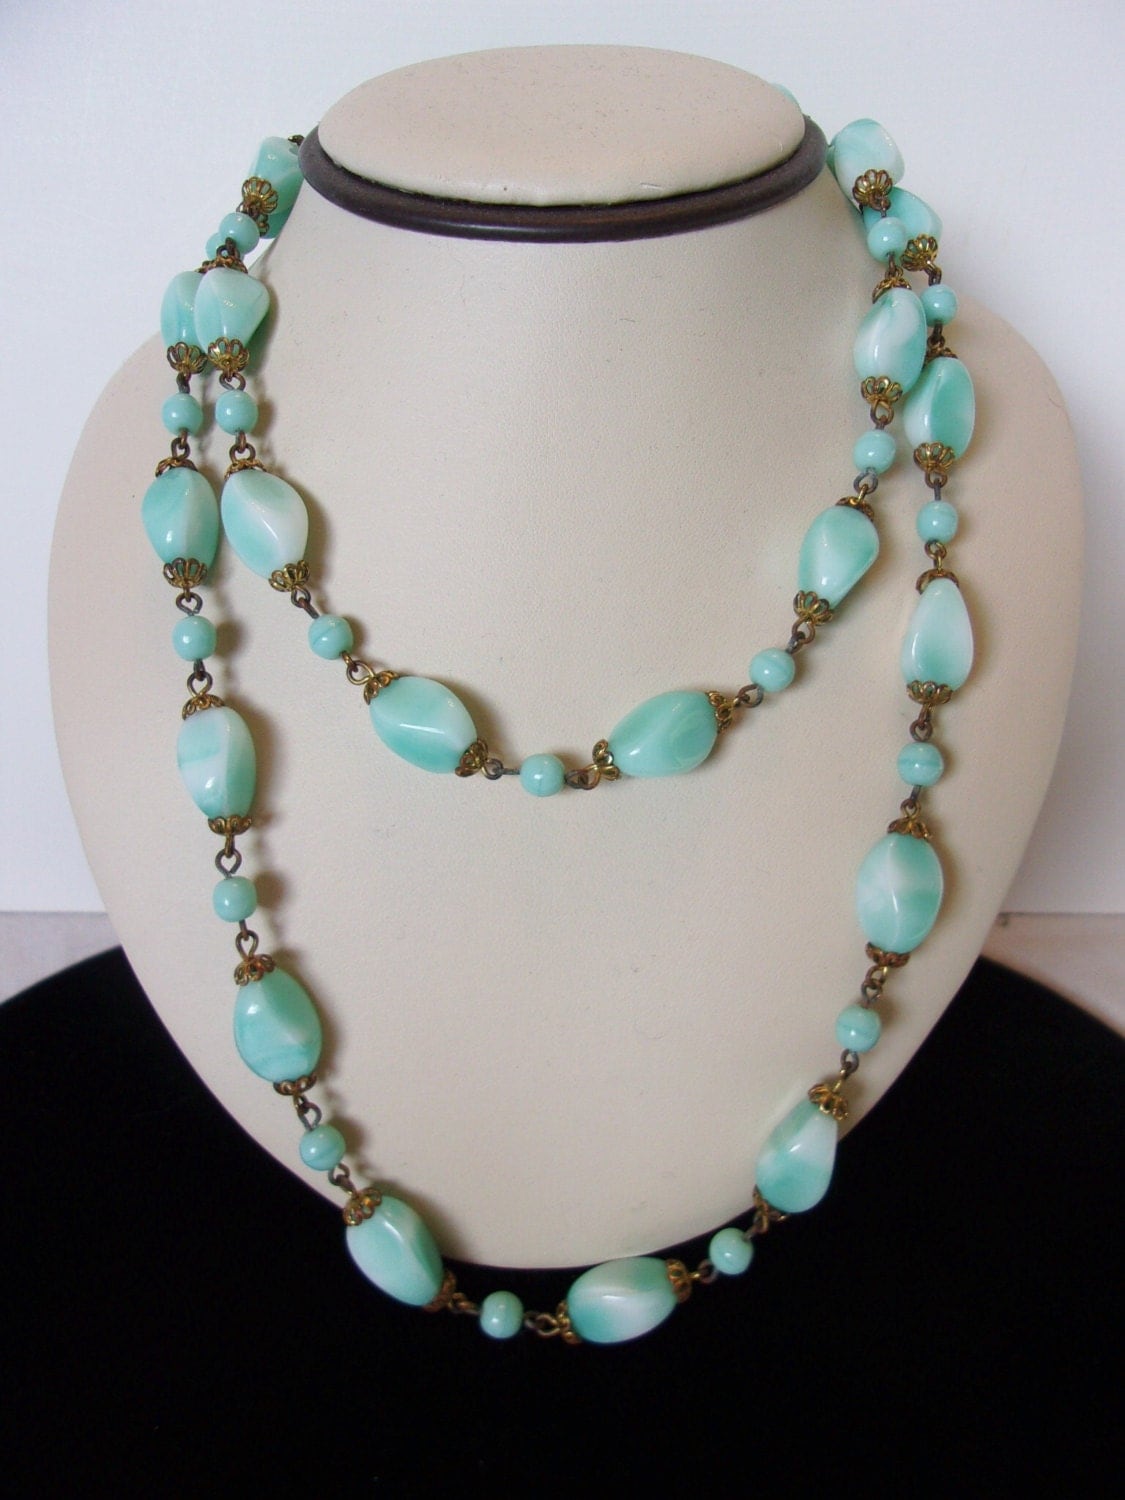 ART DECO Jewelry Necklace Flapper Turquoise Glass Bead